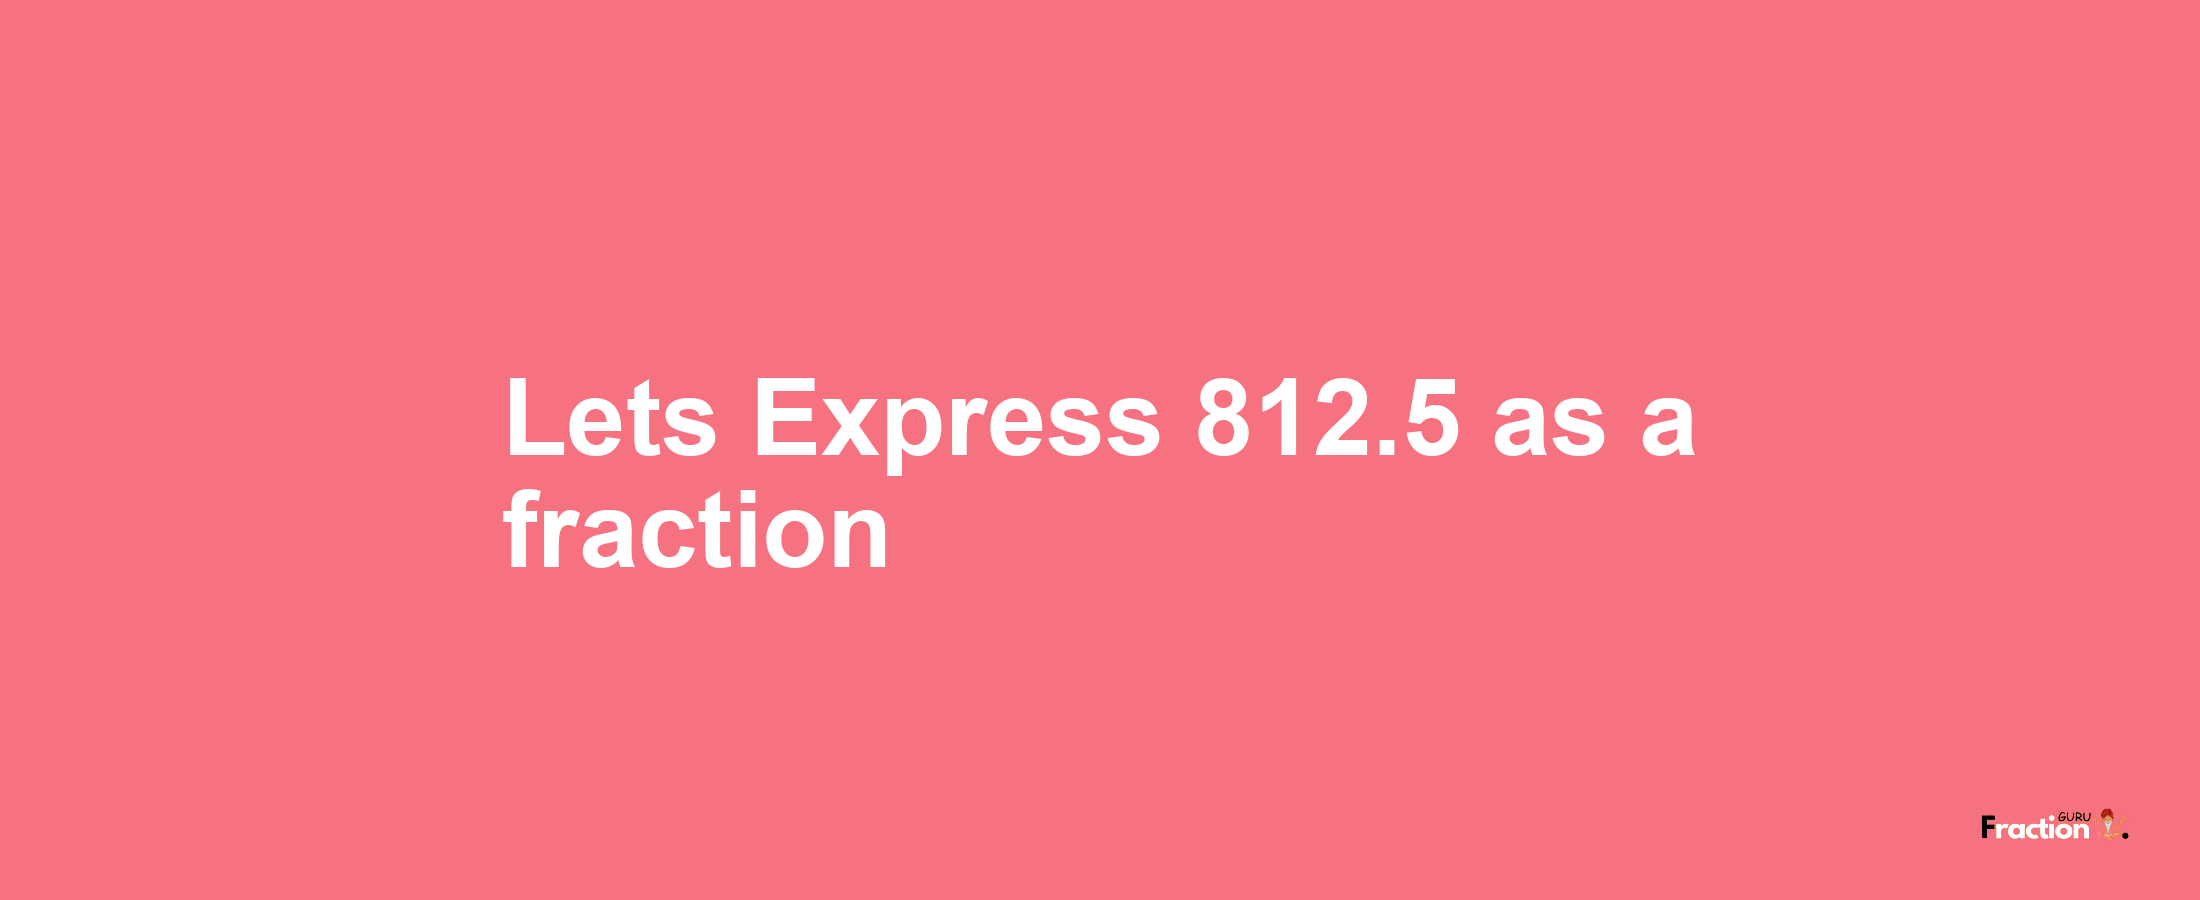 Lets Express 812.5 as afraction